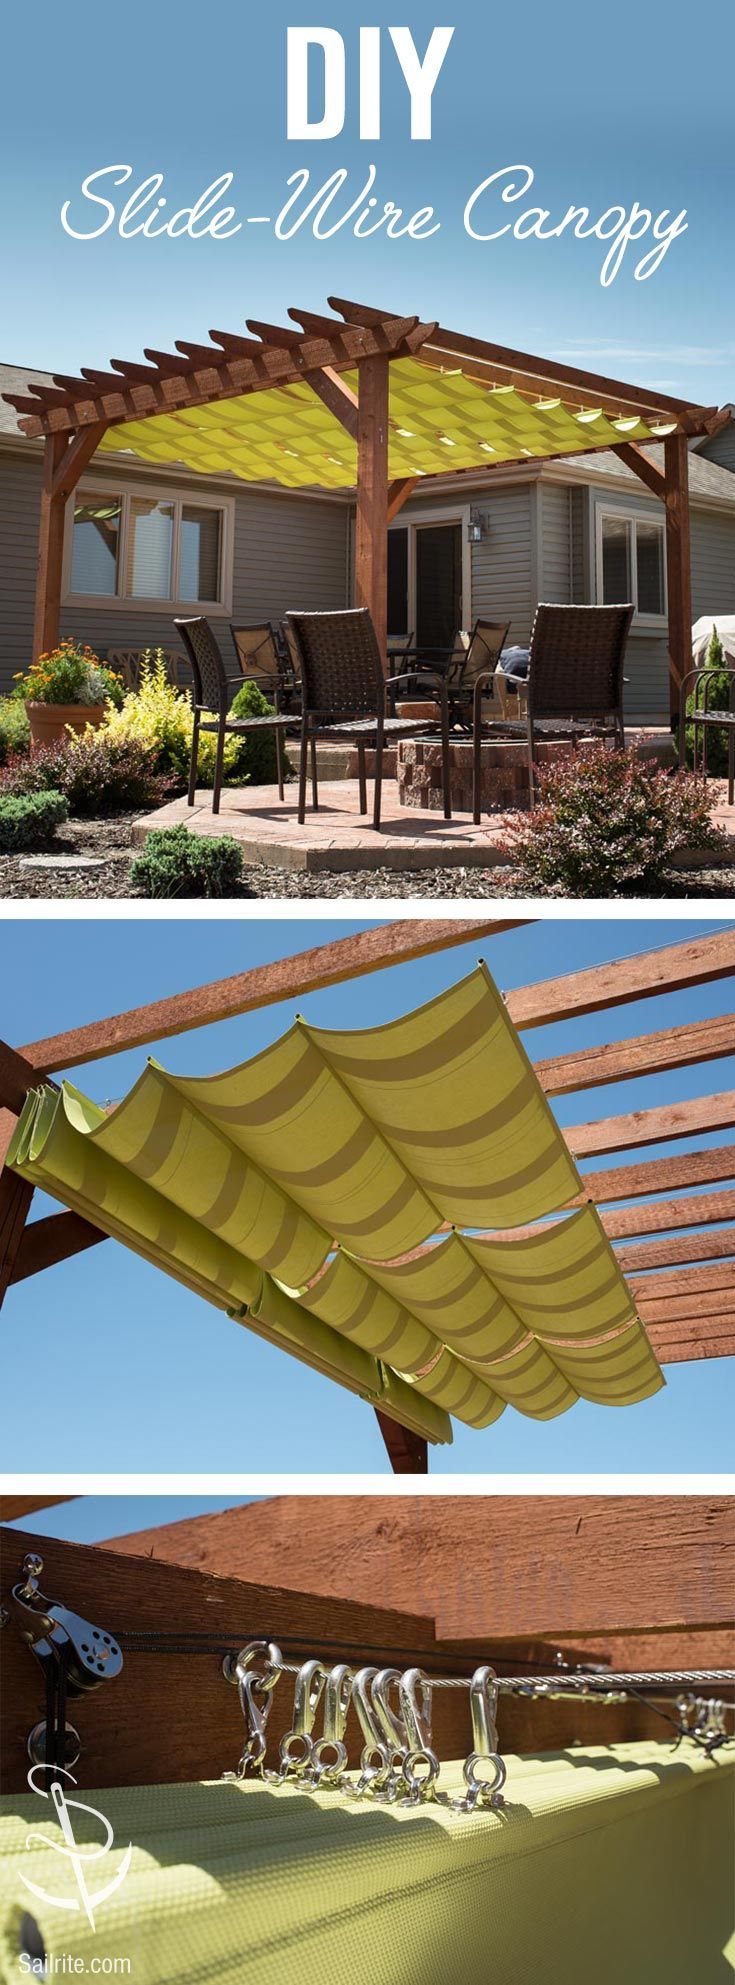 Learn how to make a slide-wire canopy with free how-to video instructions from Sai